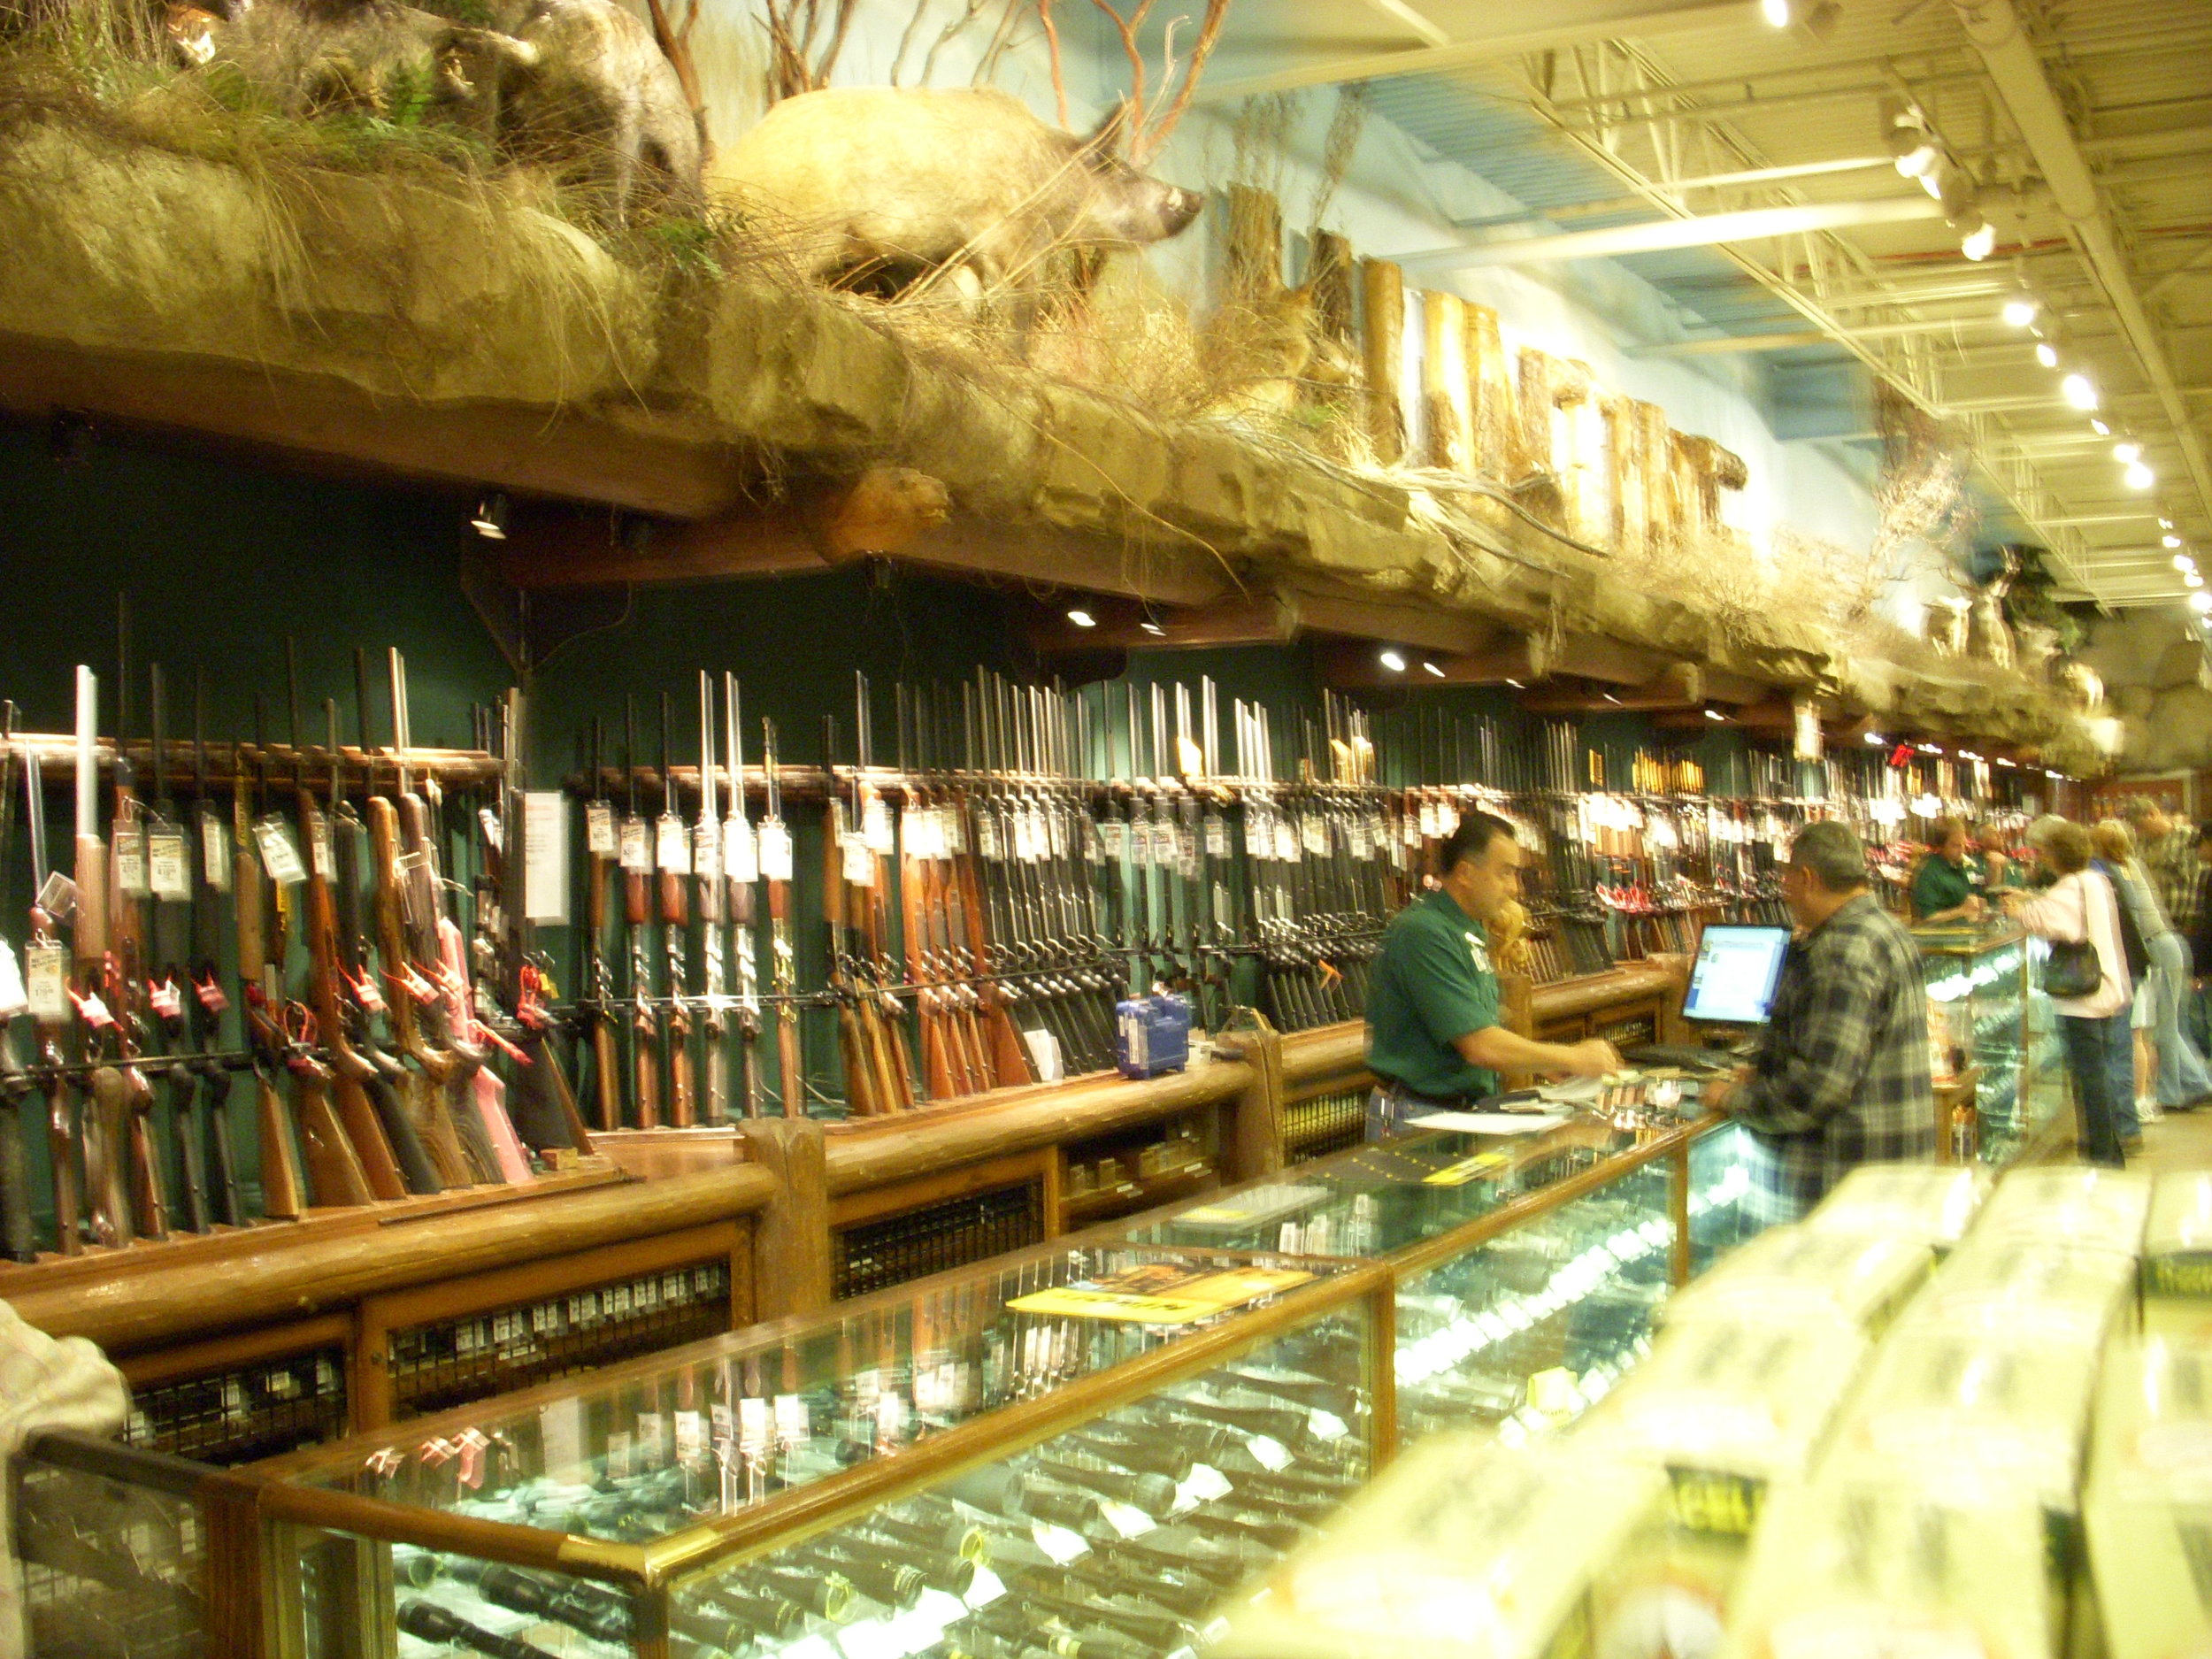 Bass Pro Shops At Victoria Gardens Originally Published 2009